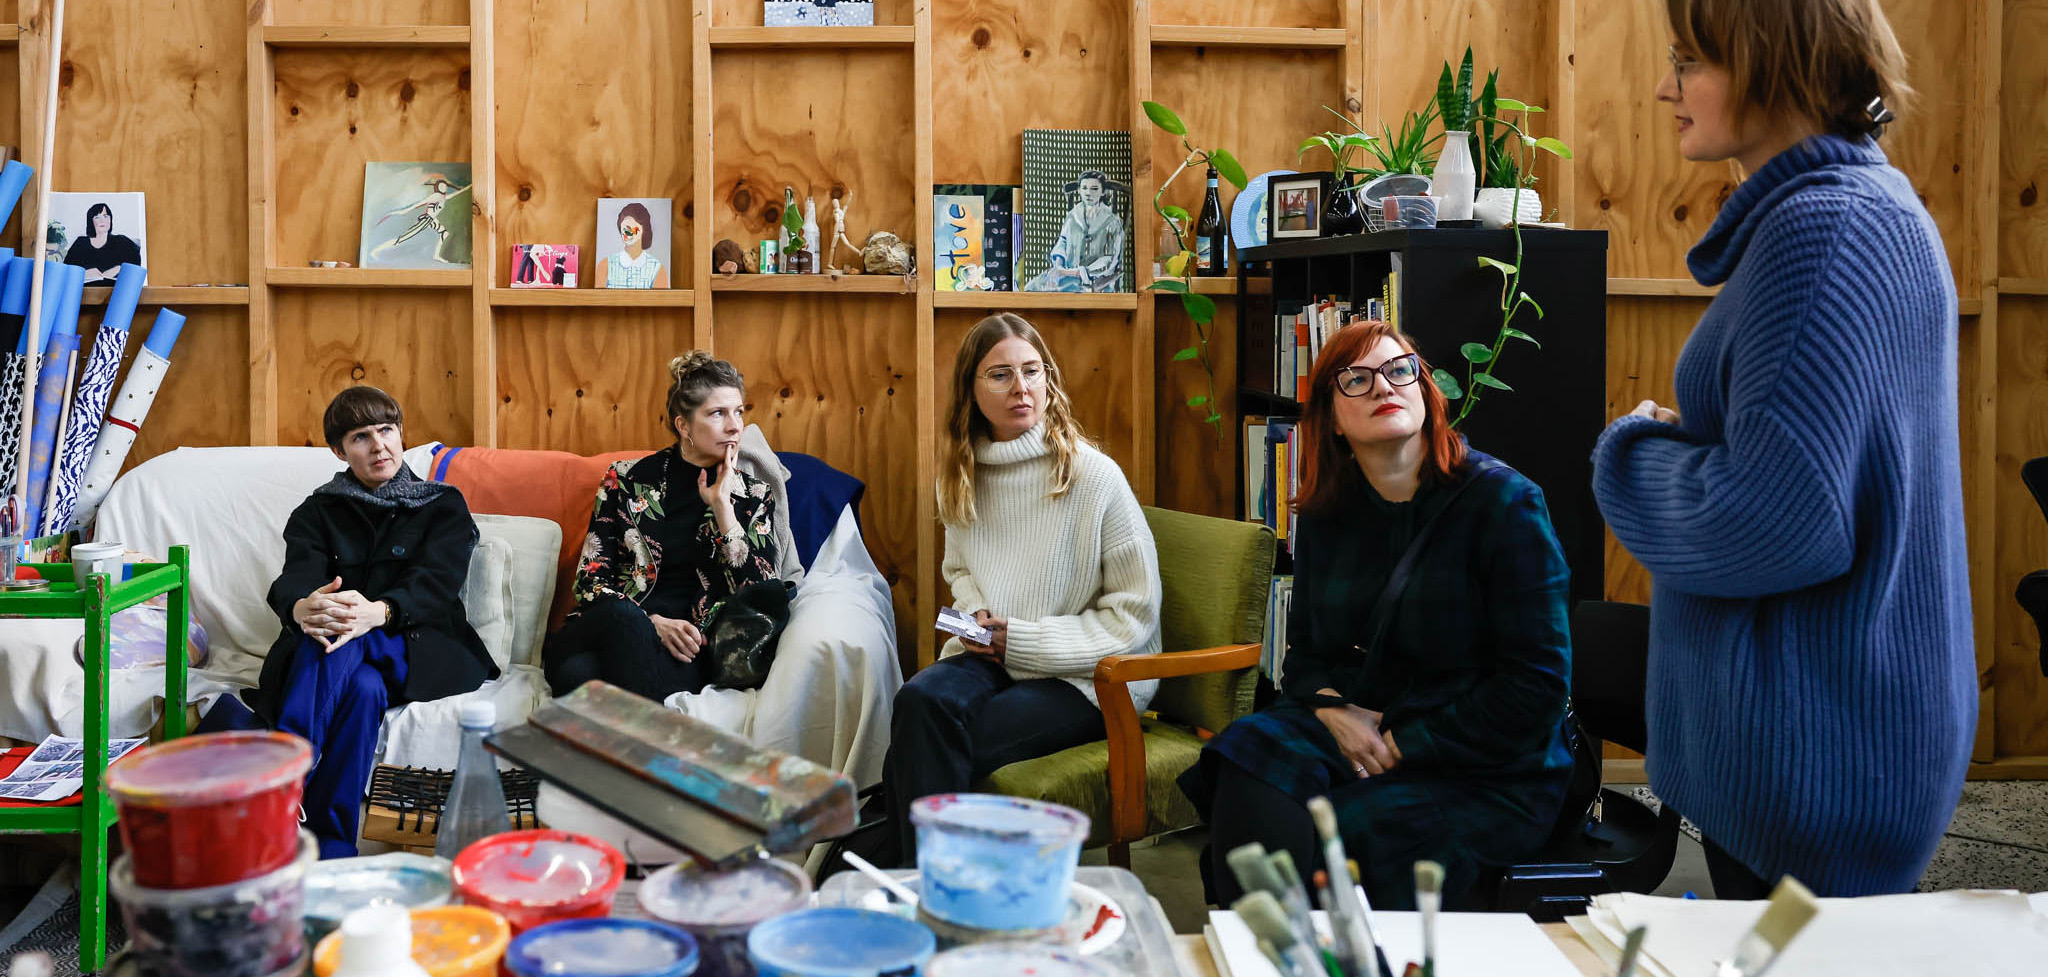 A group of women gathered and talking inside a studio filled with art and materials